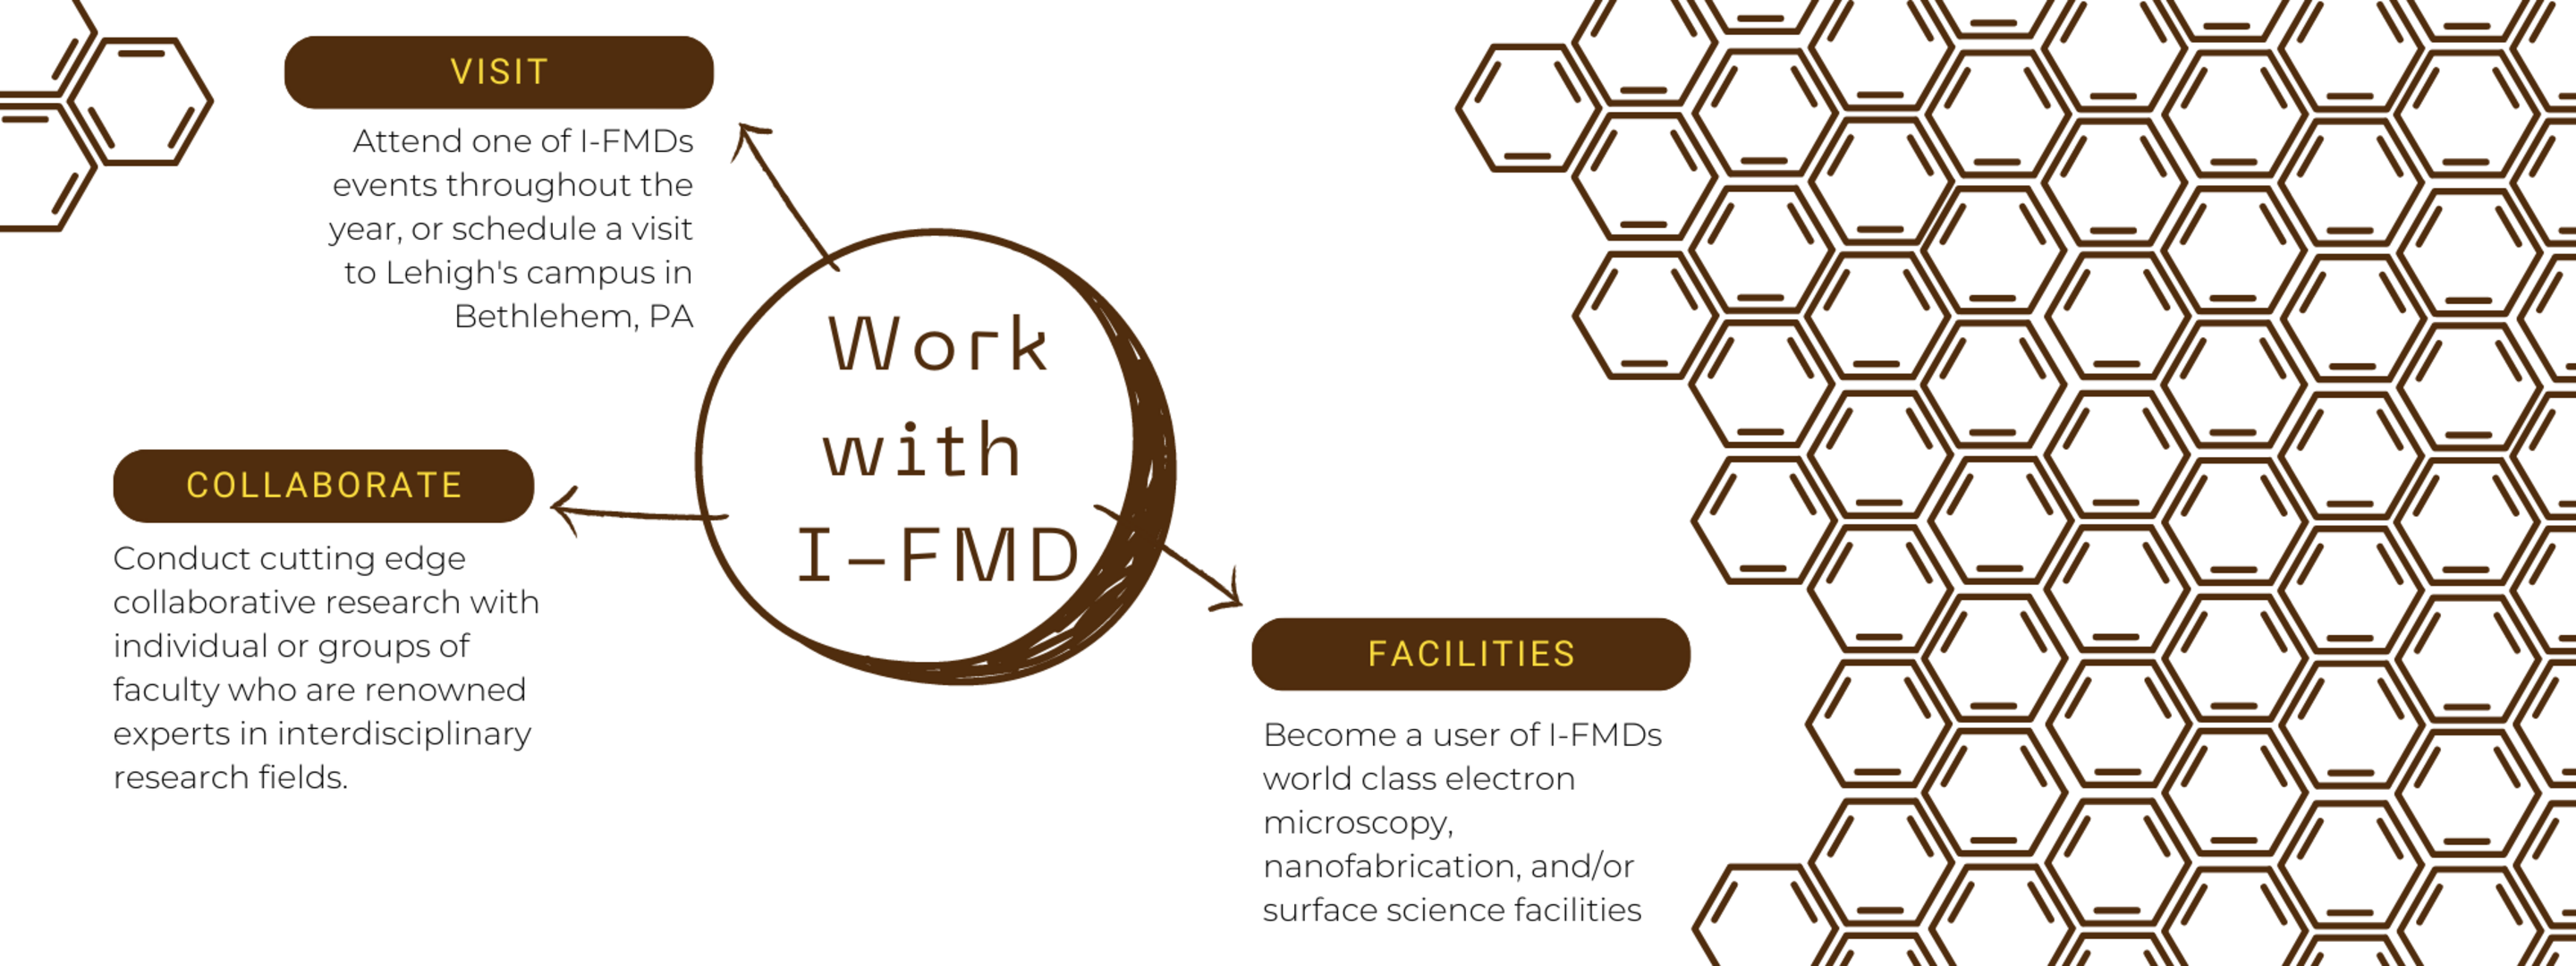 Image describing the ways to work with I-FMD. They include visiting, collaborating, and becoming a user of I-FMD's facilities. More description of each is on this page.